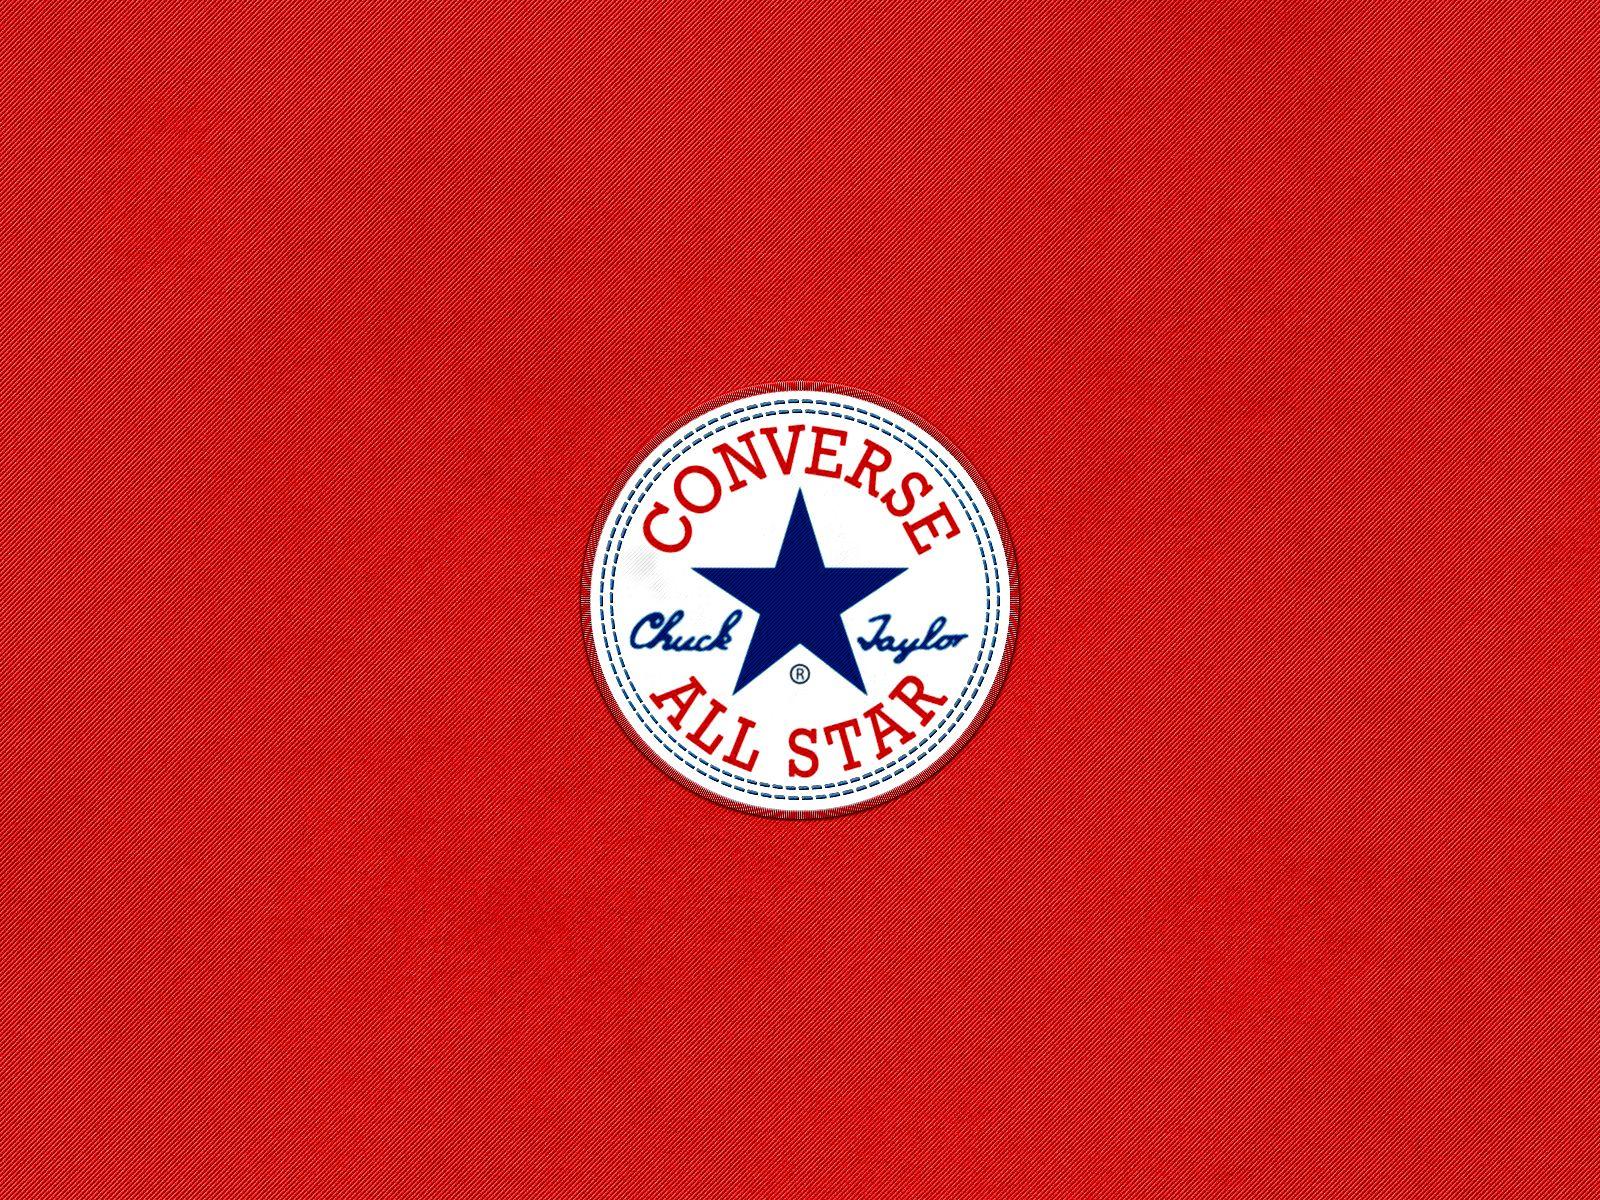 Converse Chuck Taylor All Star Logo in Red, White, and Blue